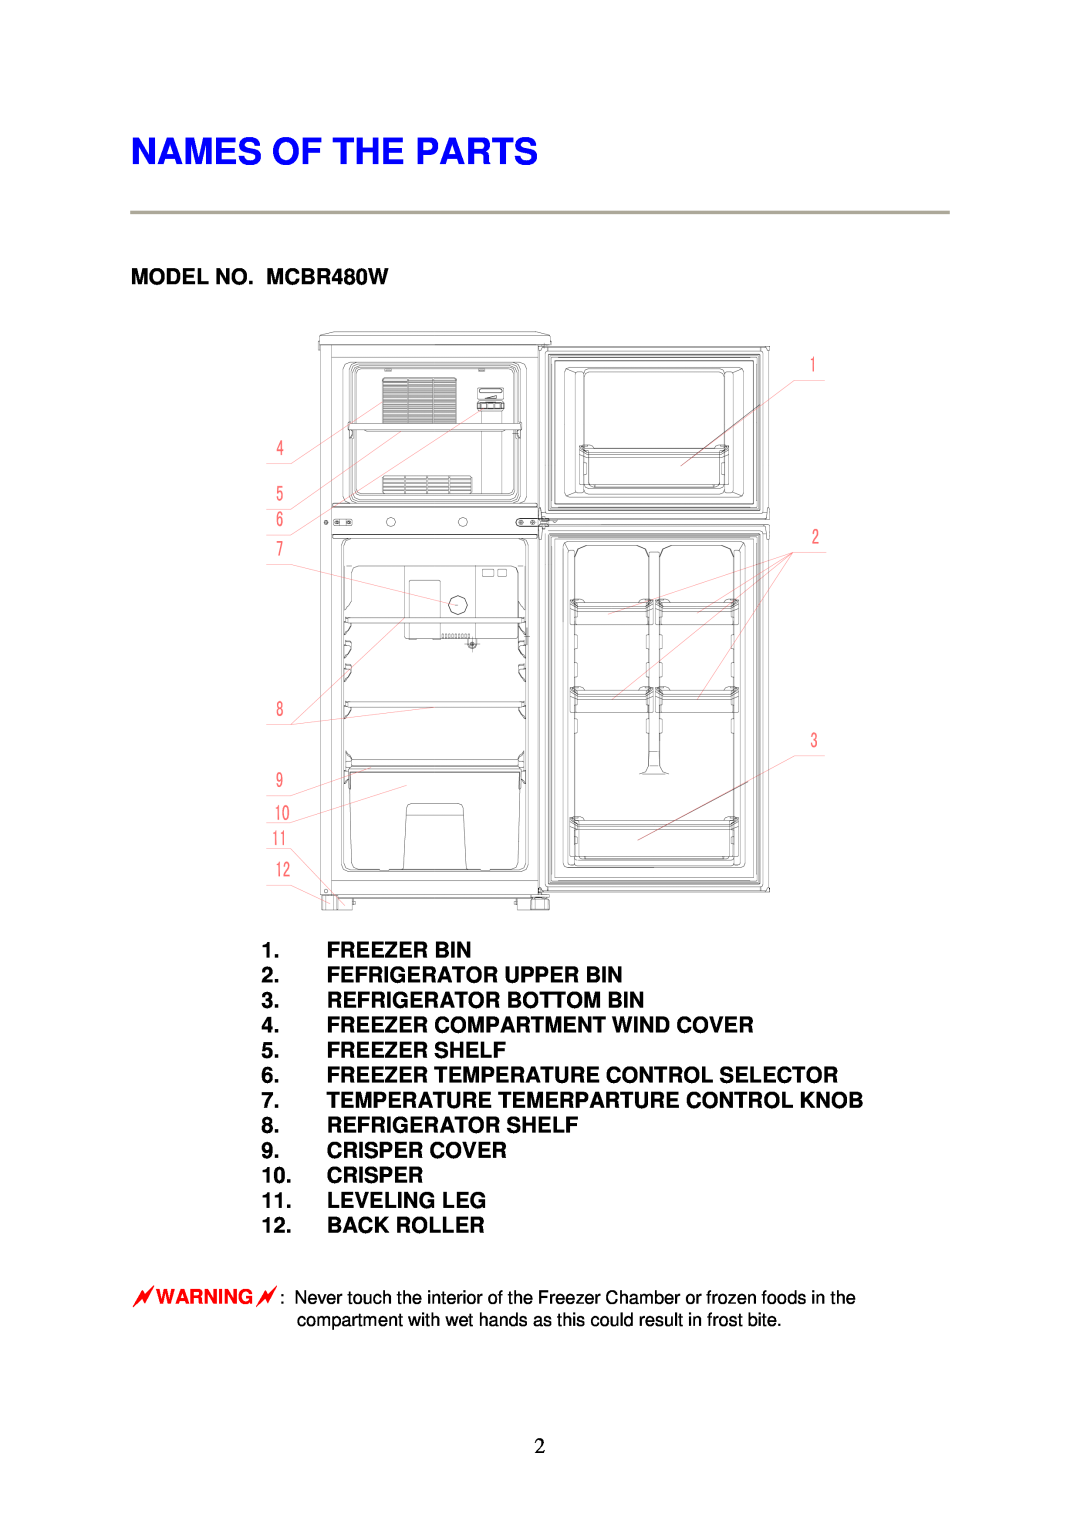 Magic Chef MCBR480W instruction manual Names Of The Parts 